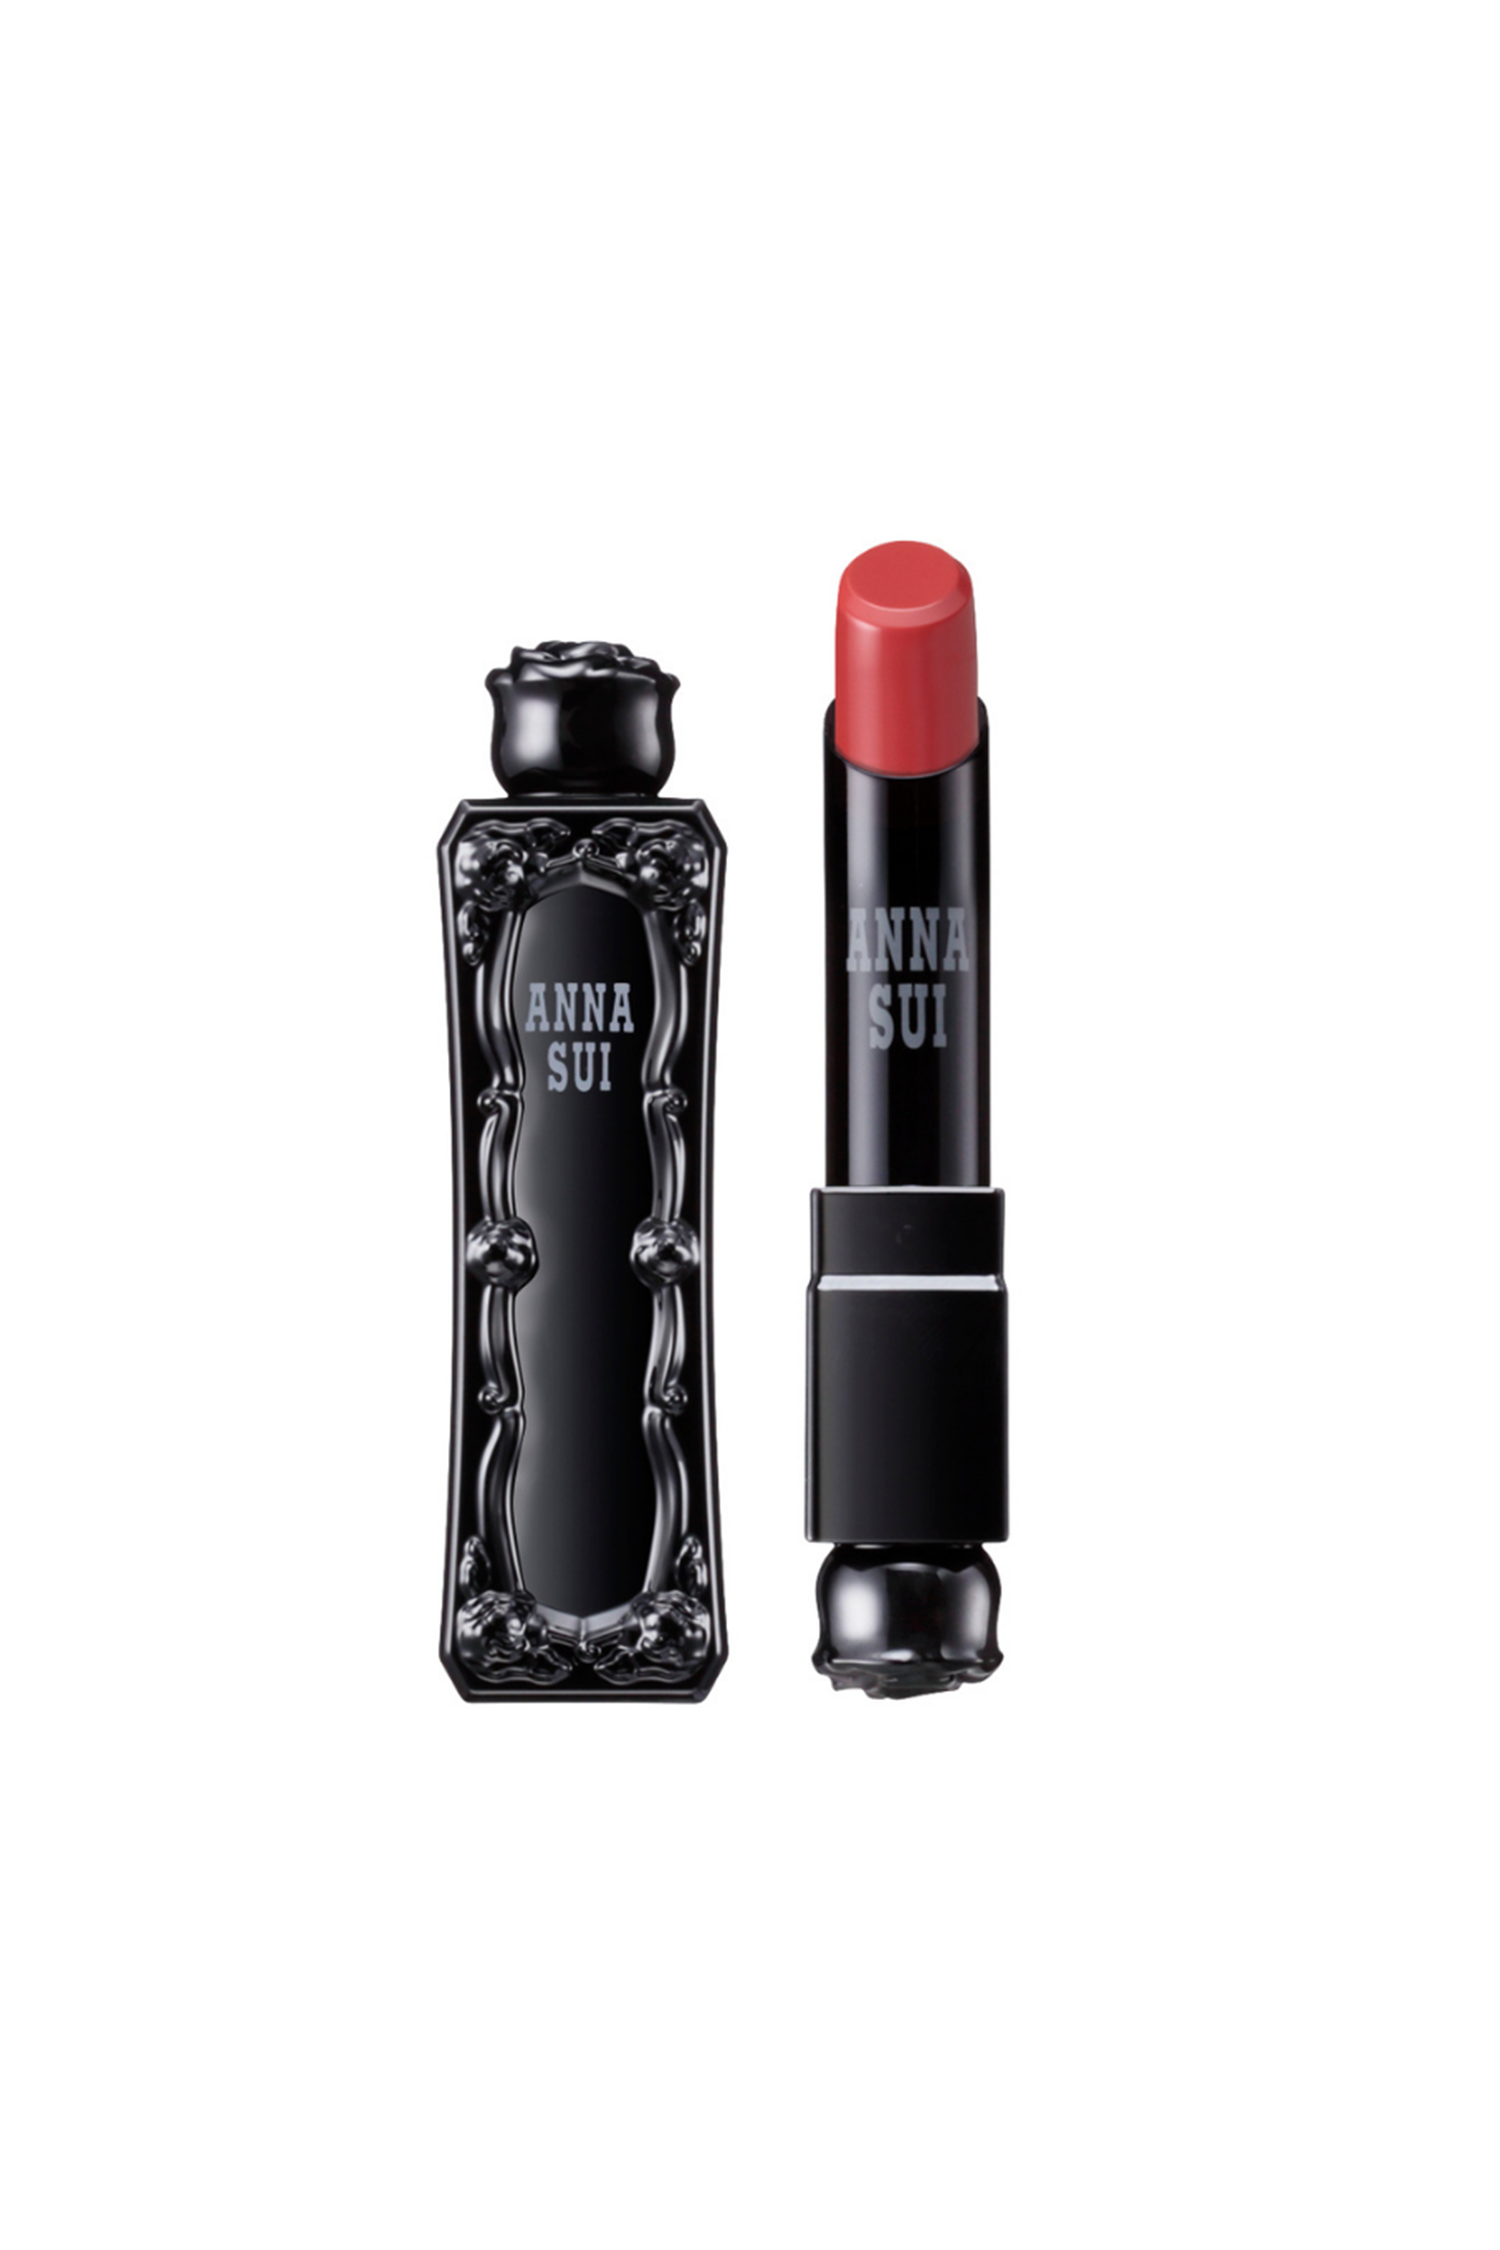 Divine Red lipstick, in an Anna Sui, black container with raised rose pattern, rose on top 